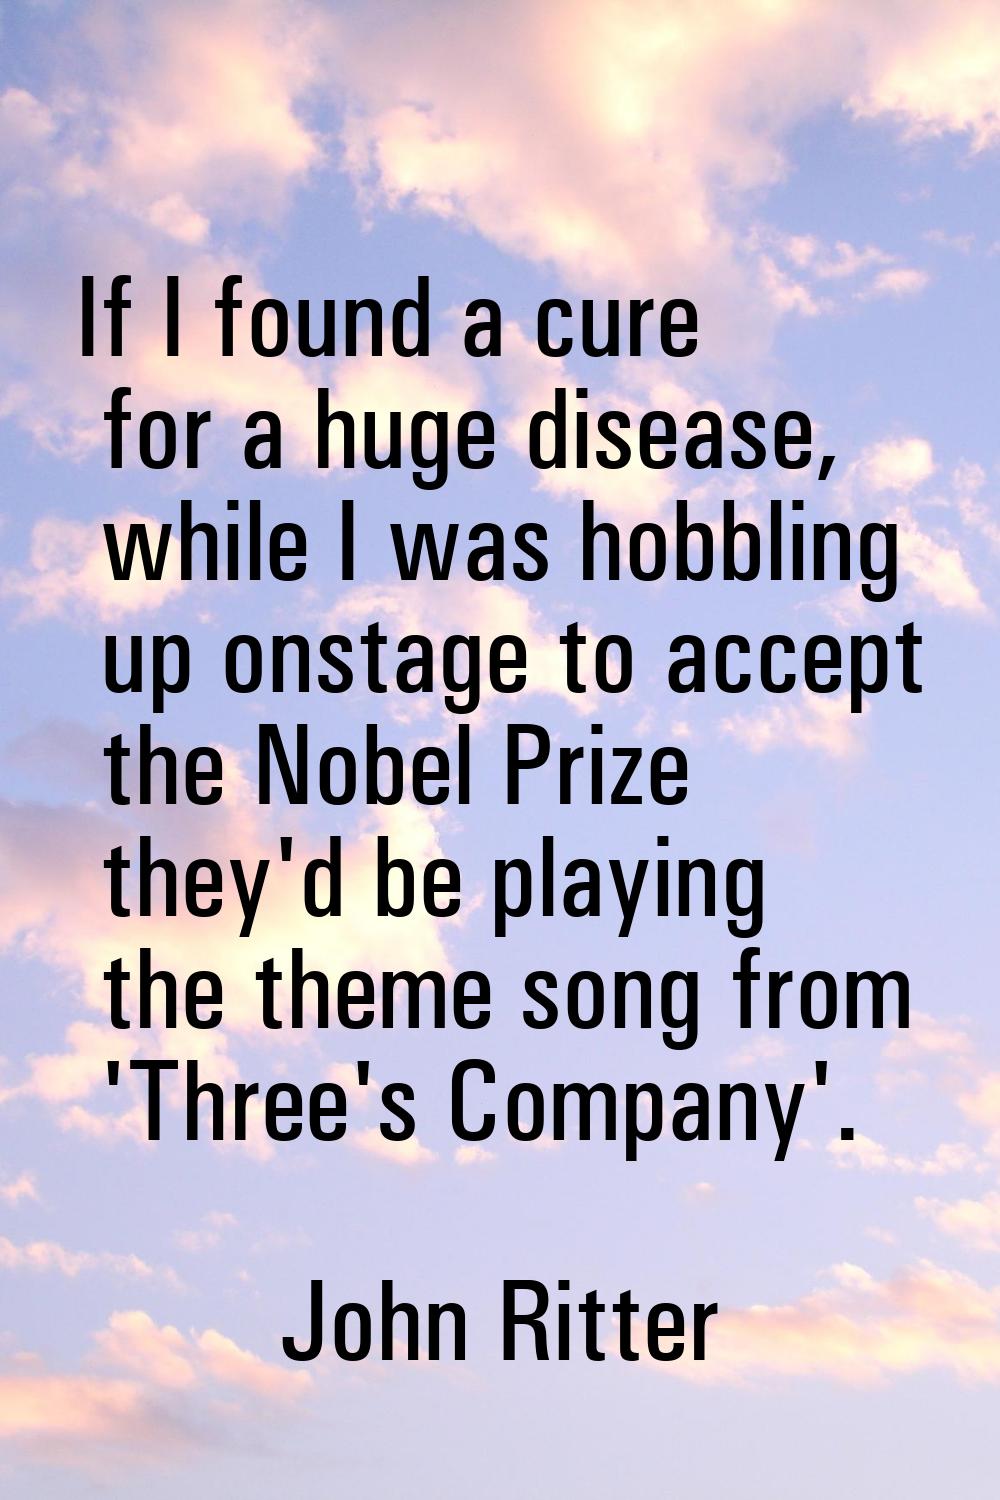 If I found a cure for a huge disease, while I was hobbling up onstage to accept the Nobel Prize the